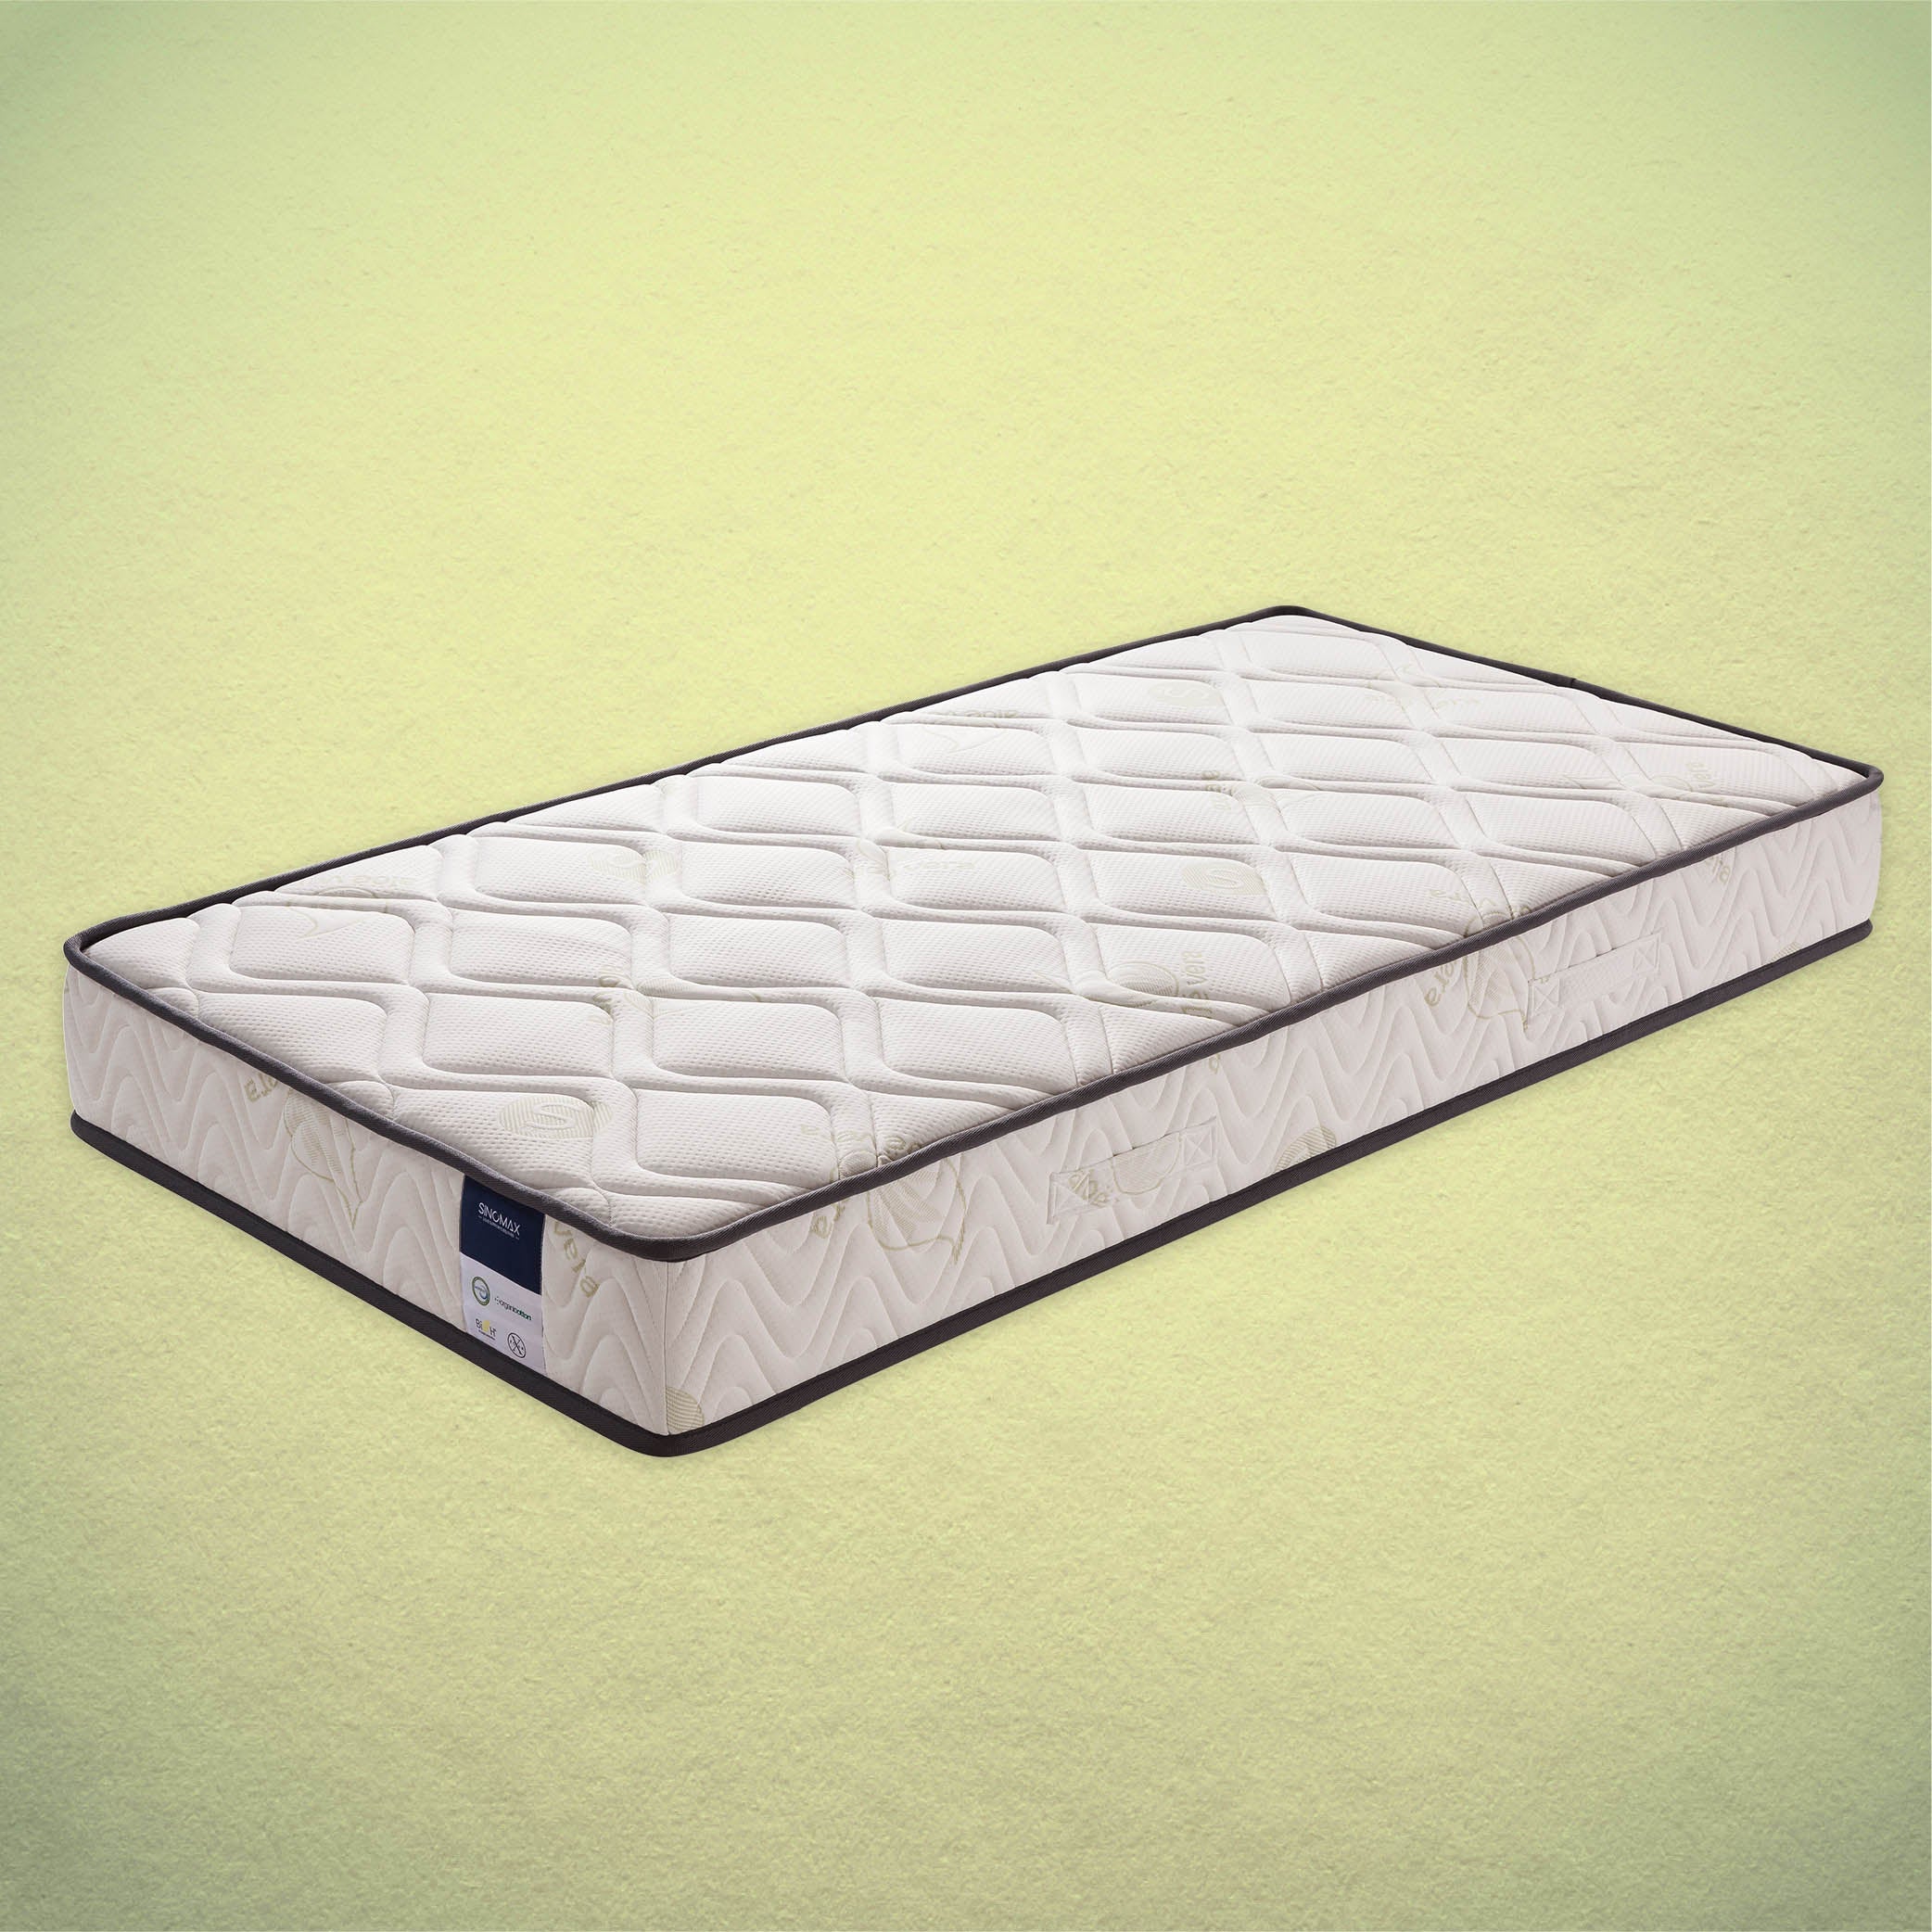 Double Backcare Mattress - Tailor-made size (Above 48" W)